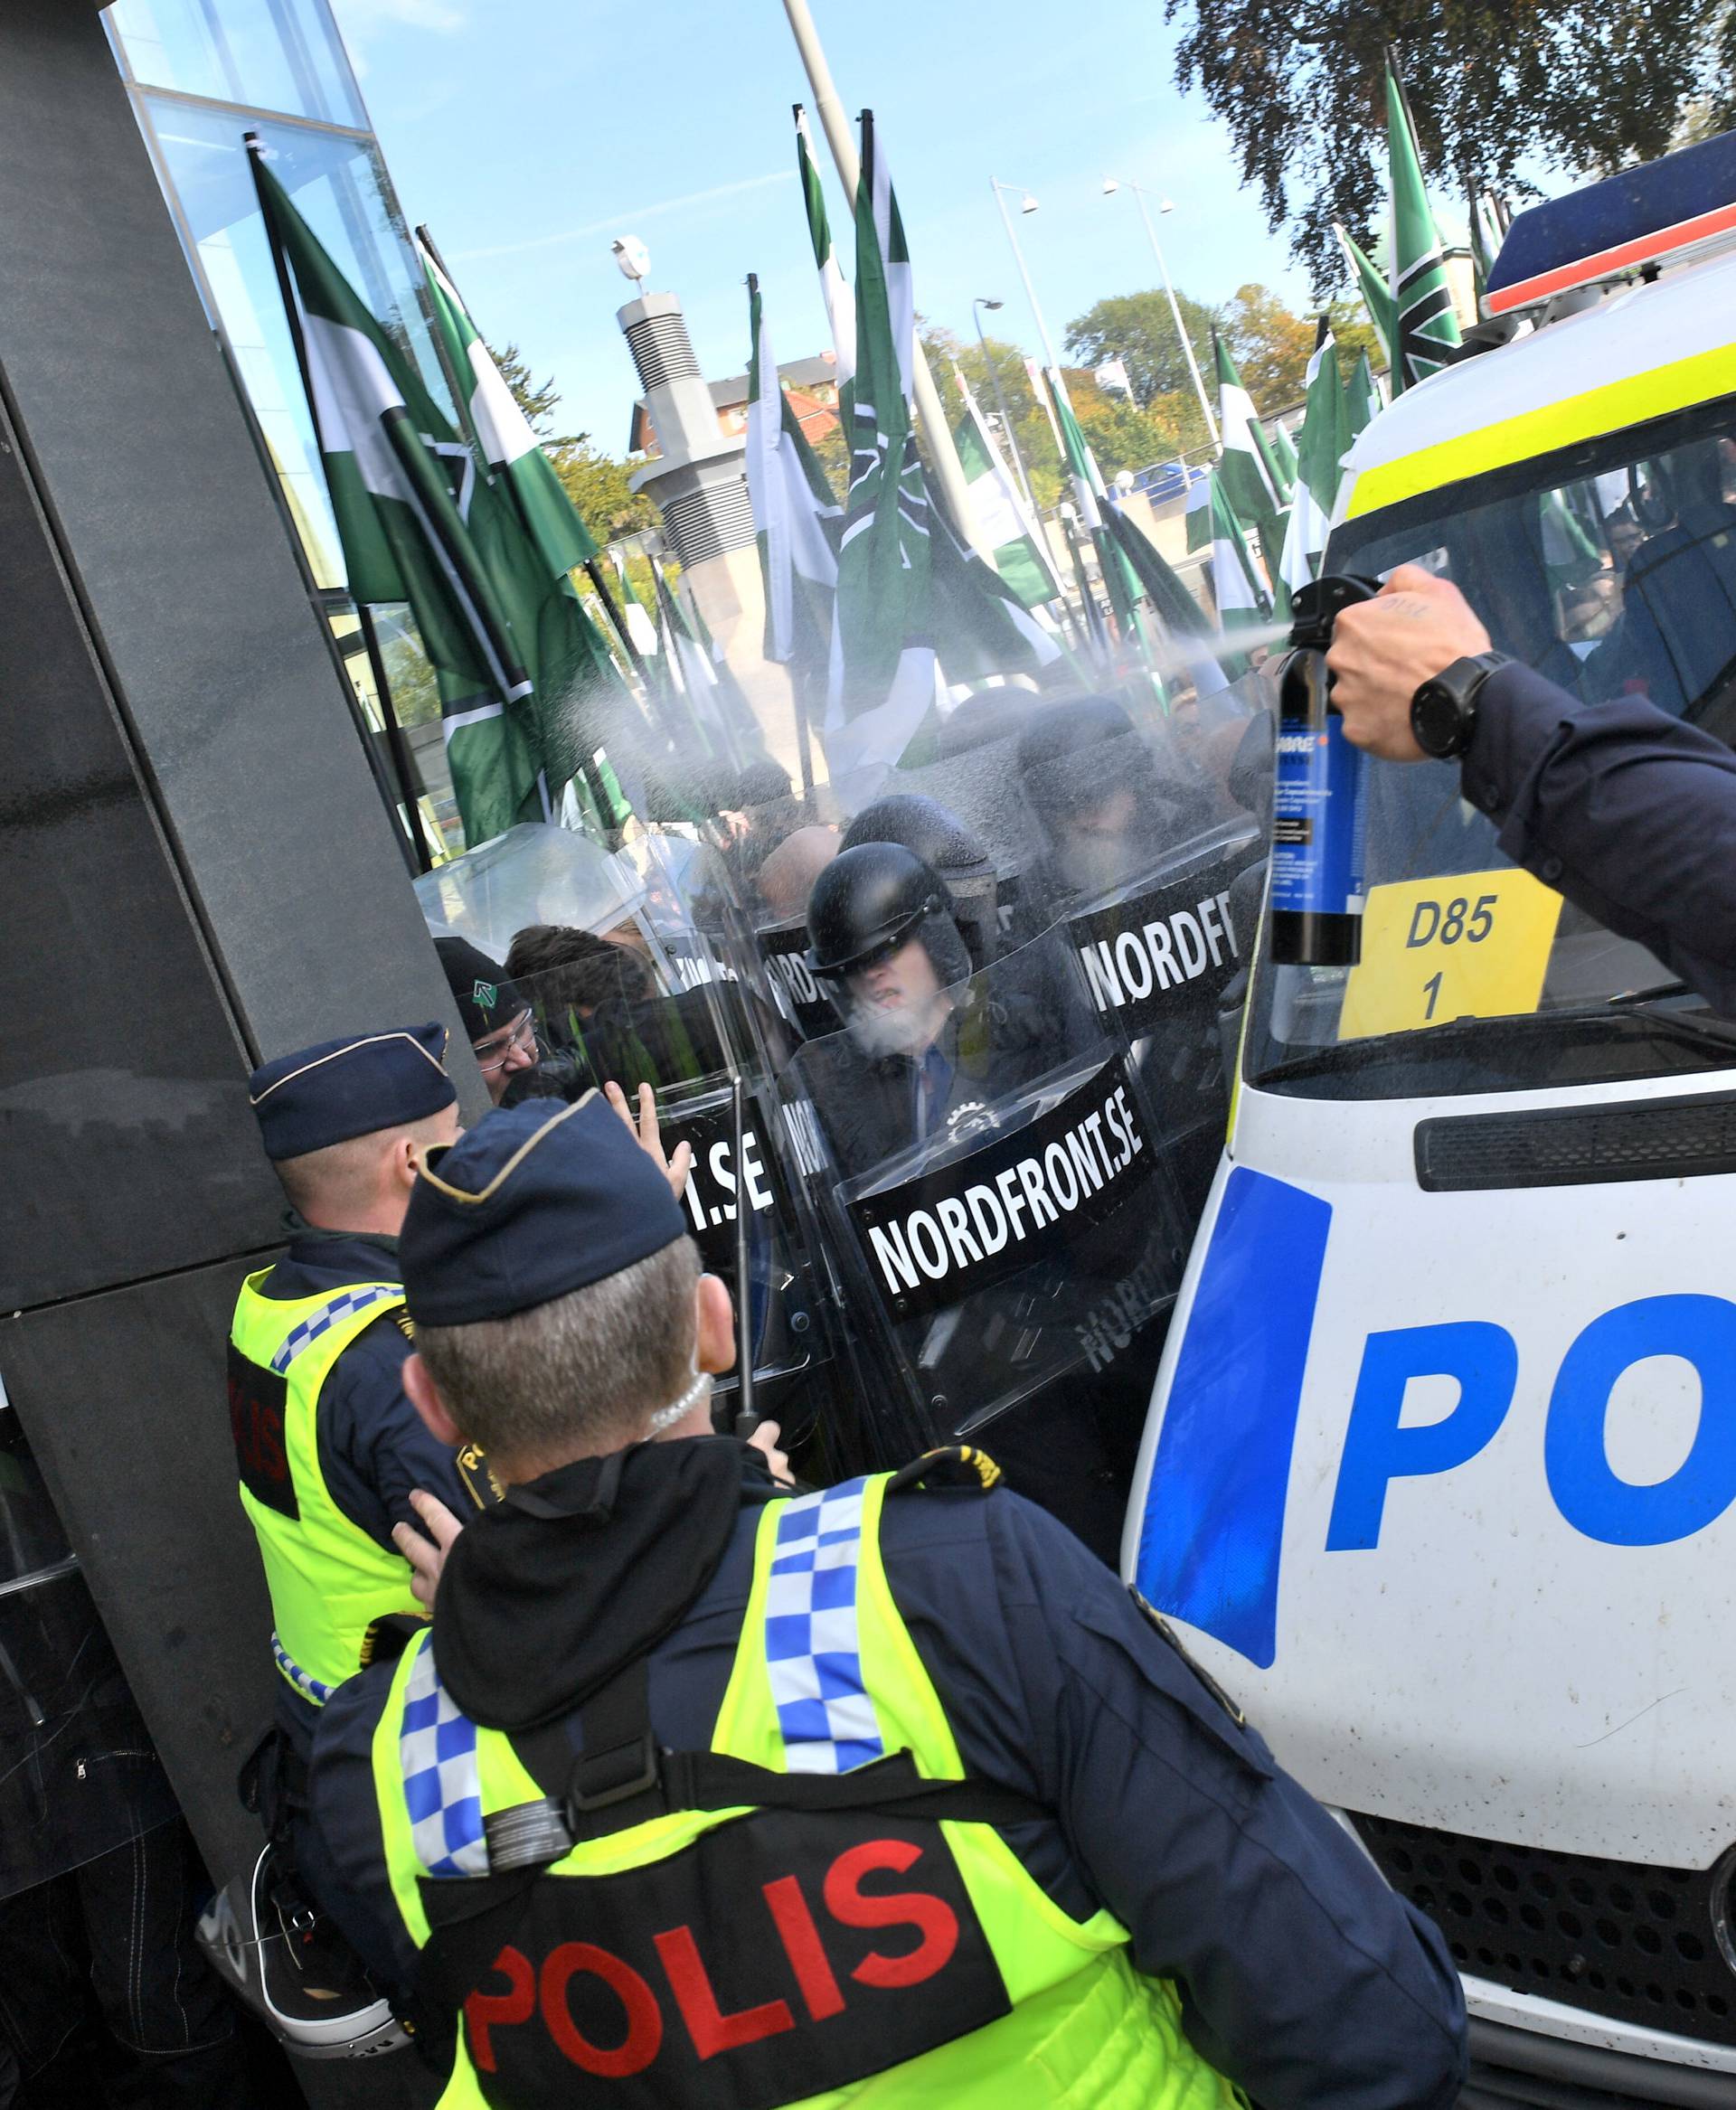 A police officer uses pepper spray on NMR demonstrators as they try to walk along a forbidden street during the Nordic Resistance Movement march in central Gothenburg